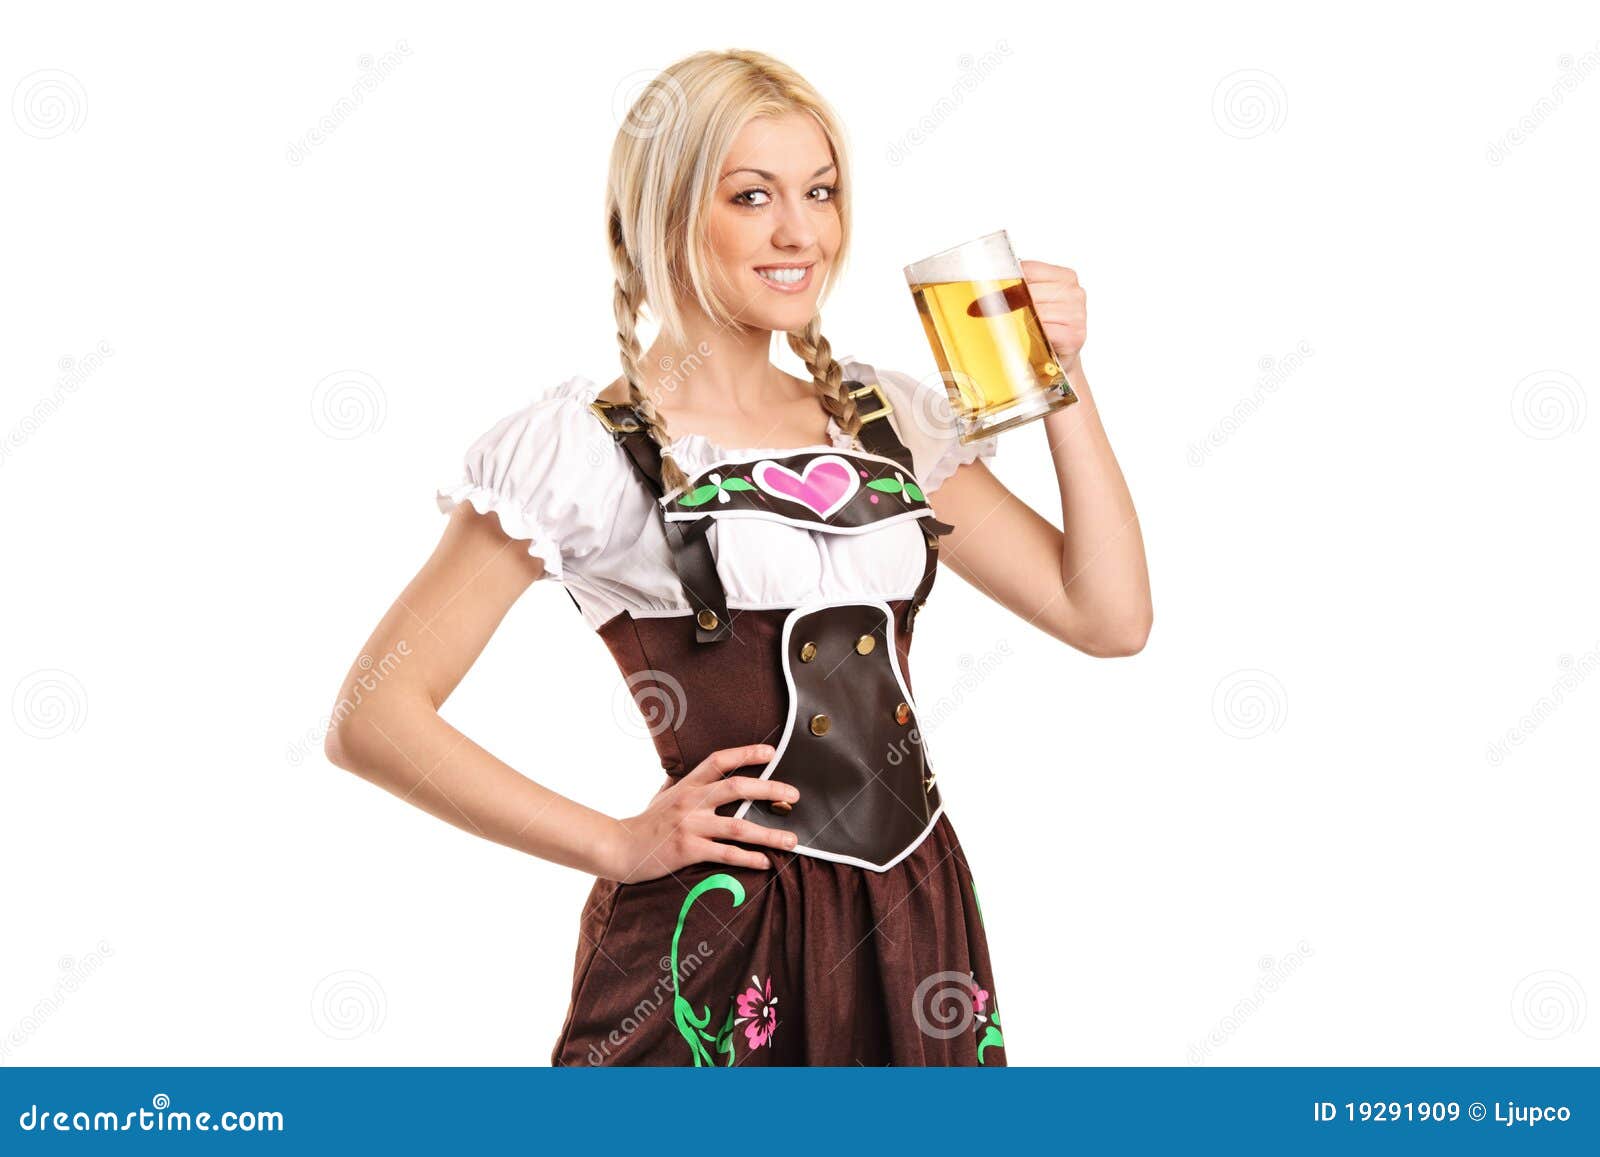 Woman holding a beer glass stock image. Image of froth - 19291909